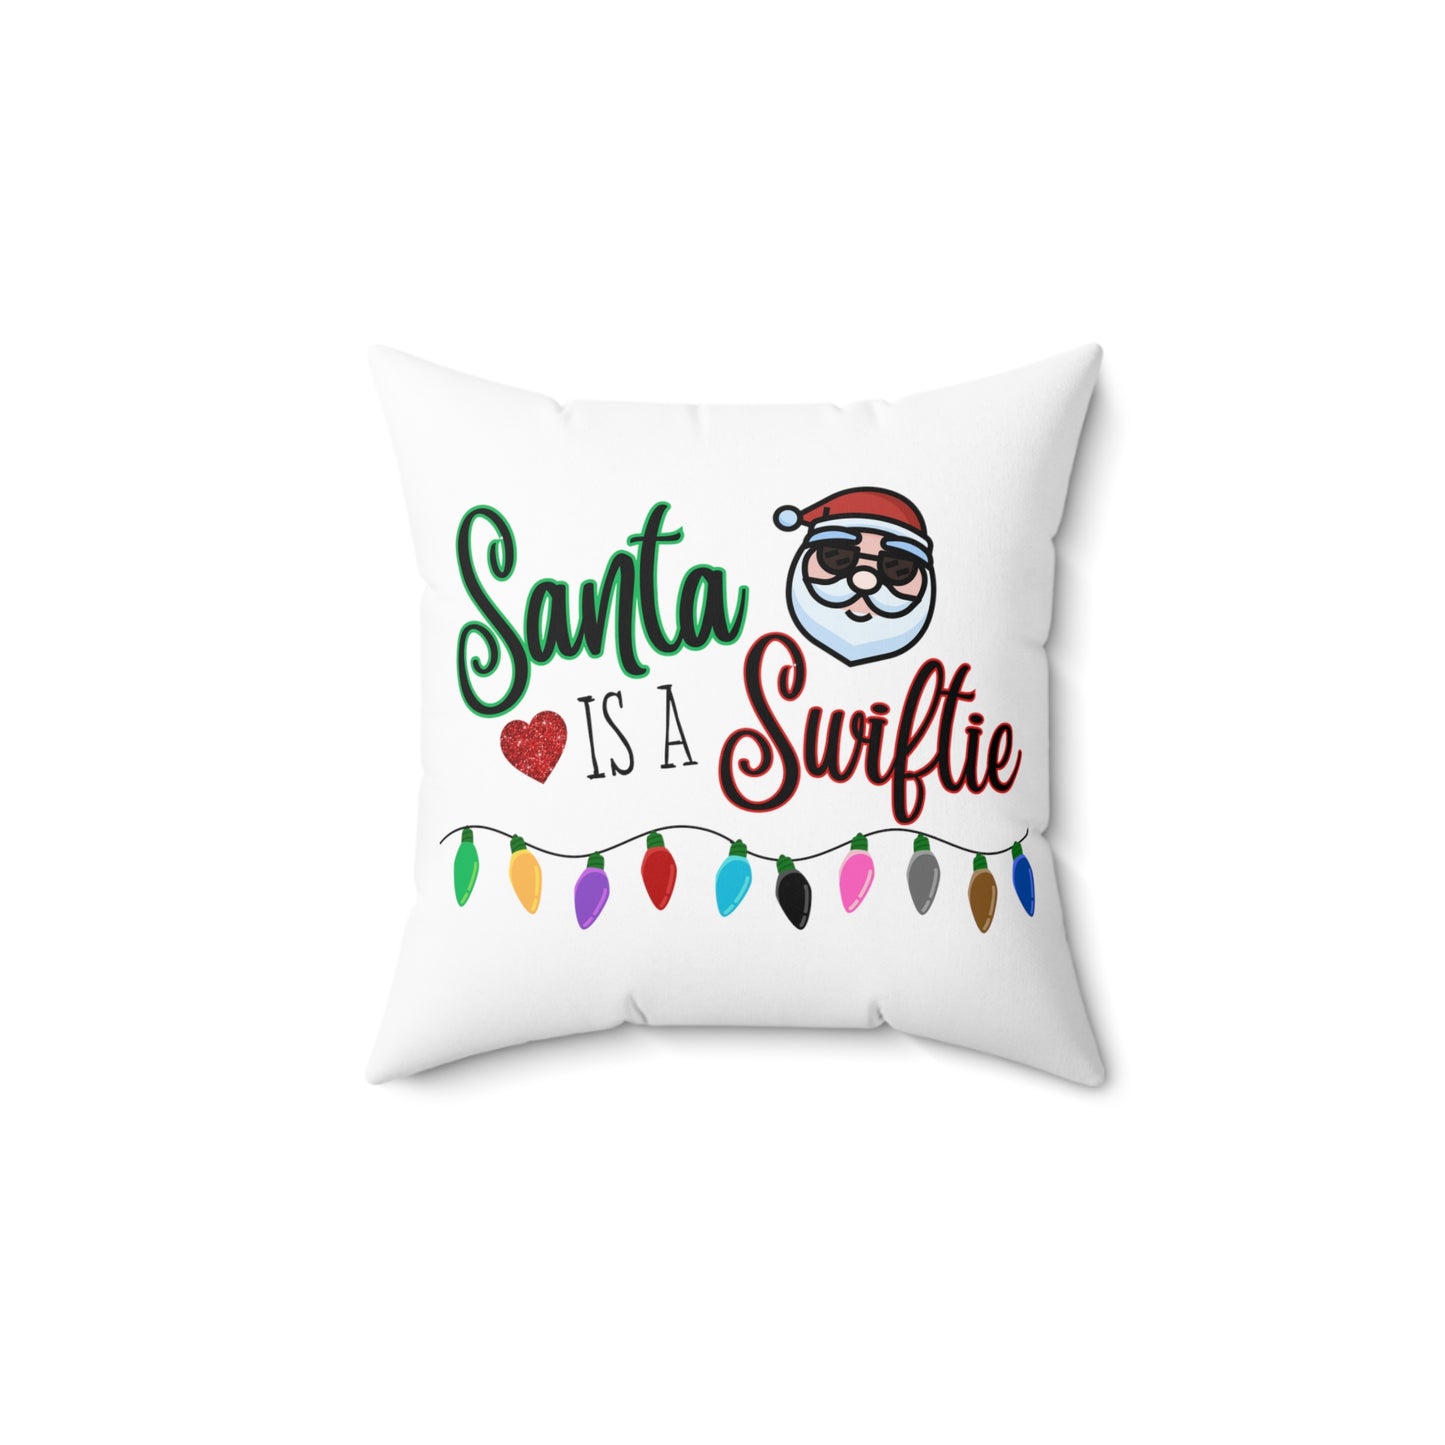 Santa is a Swiftie Spun Polyester Square Pillow, Taylor Swift Christmas Throw Pillow, Swiftie Christmas Gift